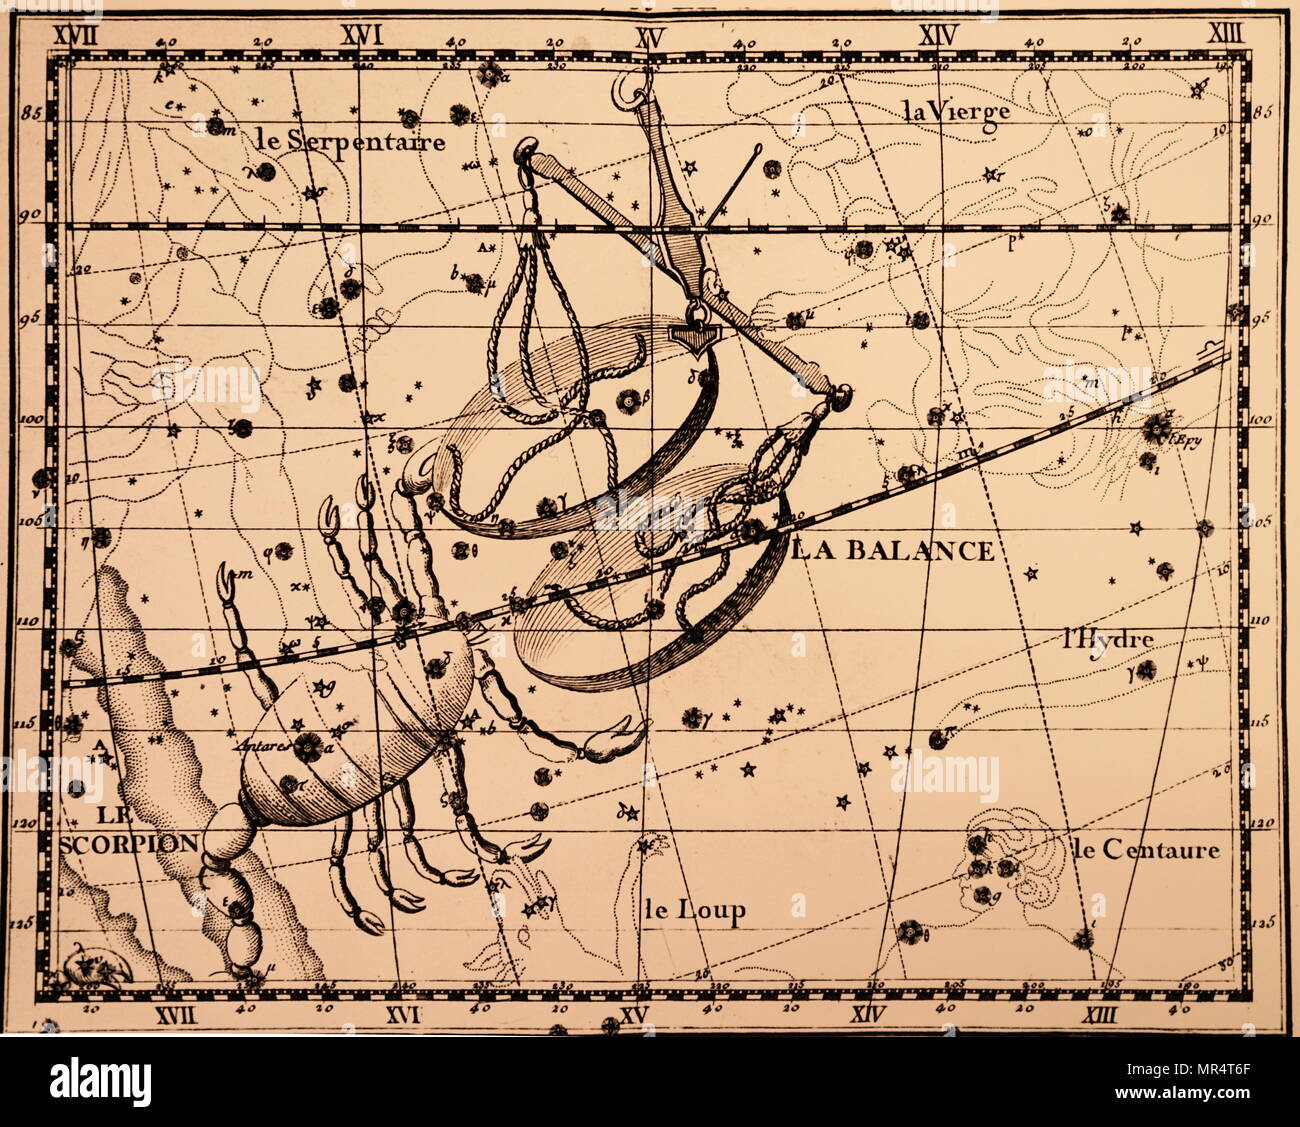 Engraving depicting the constellations Scorpius and Libra. Scorpius is one of the constellations of the zodiac. Libra is a constellation of the zodiac. Dated 18th century Stock Photo